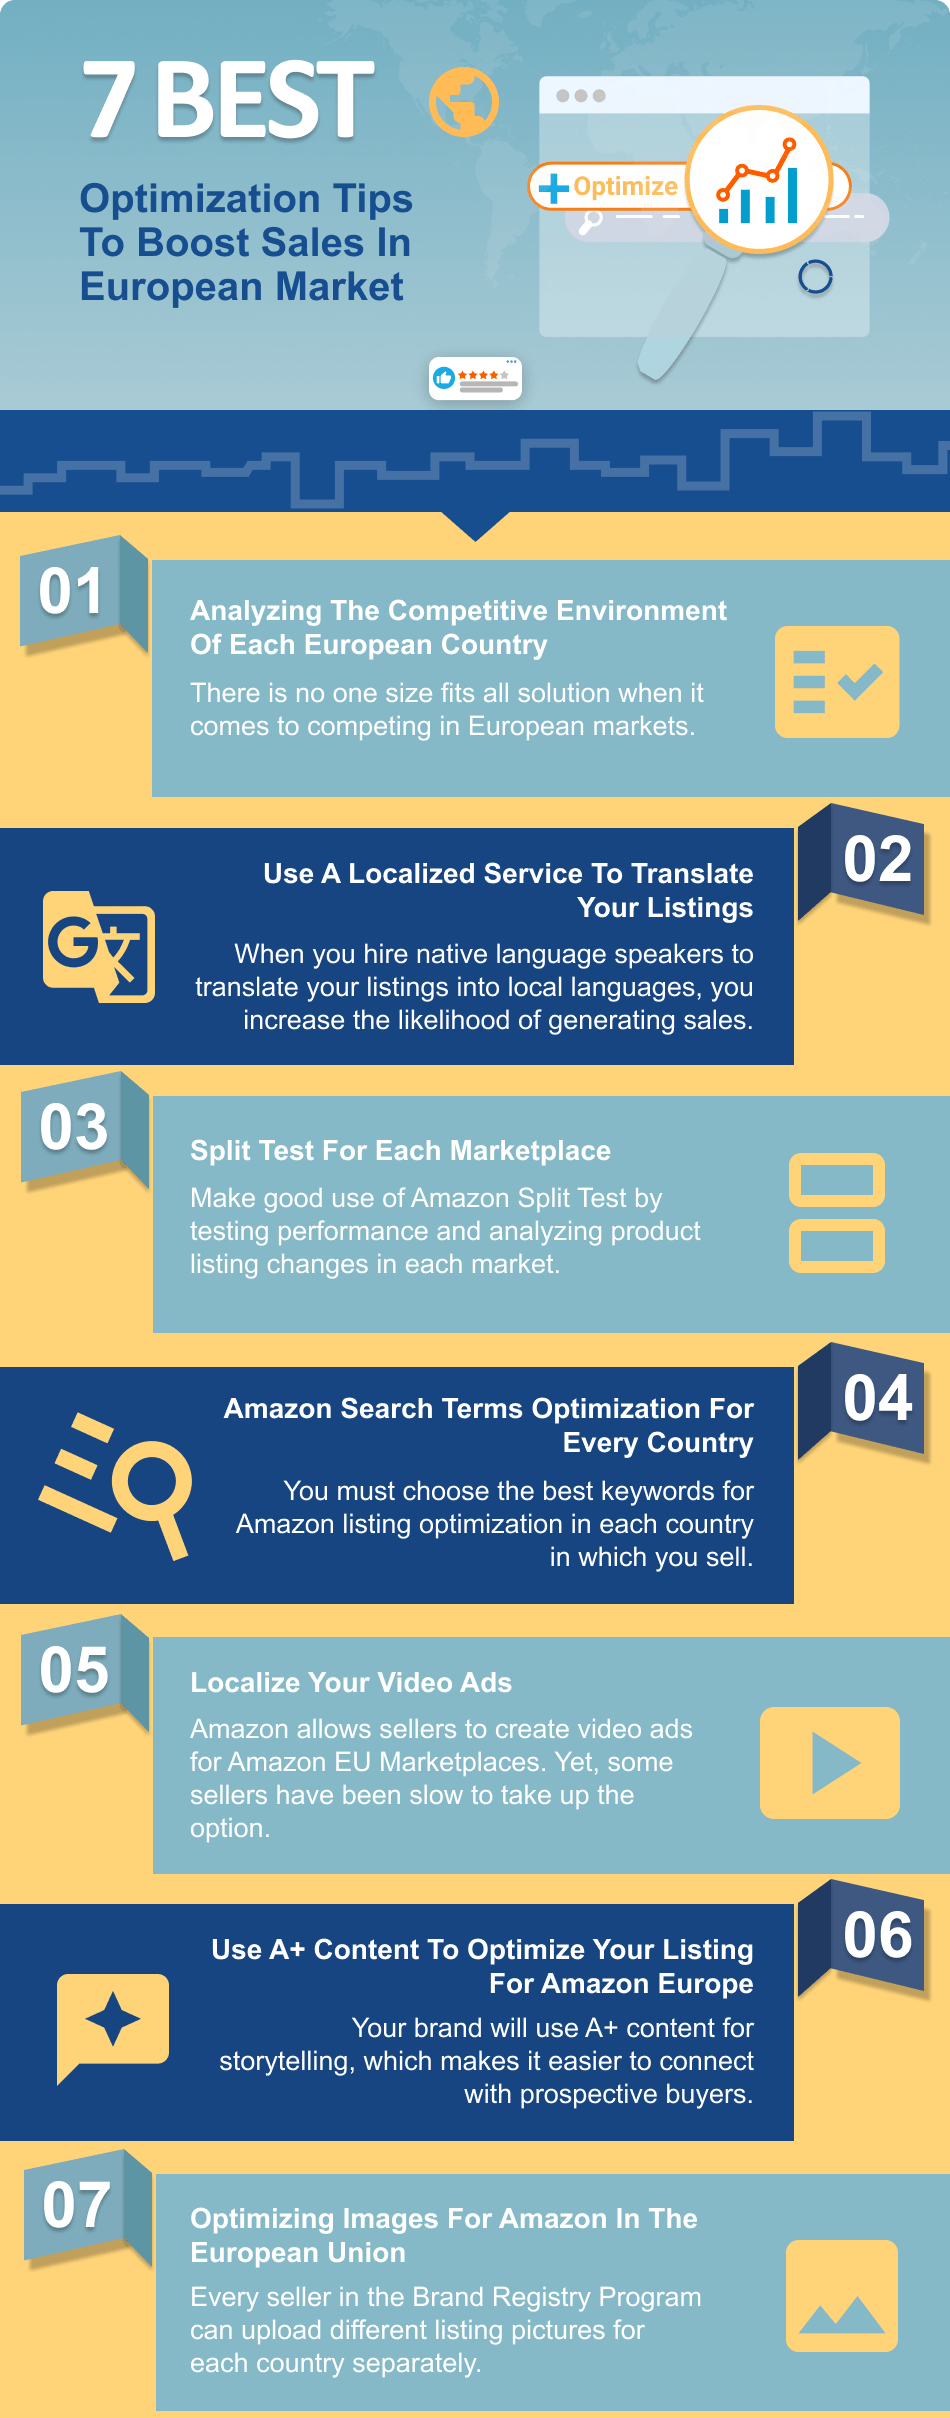 Selling On Amazon Europe - 7 Optimization Tips To Boost Sales